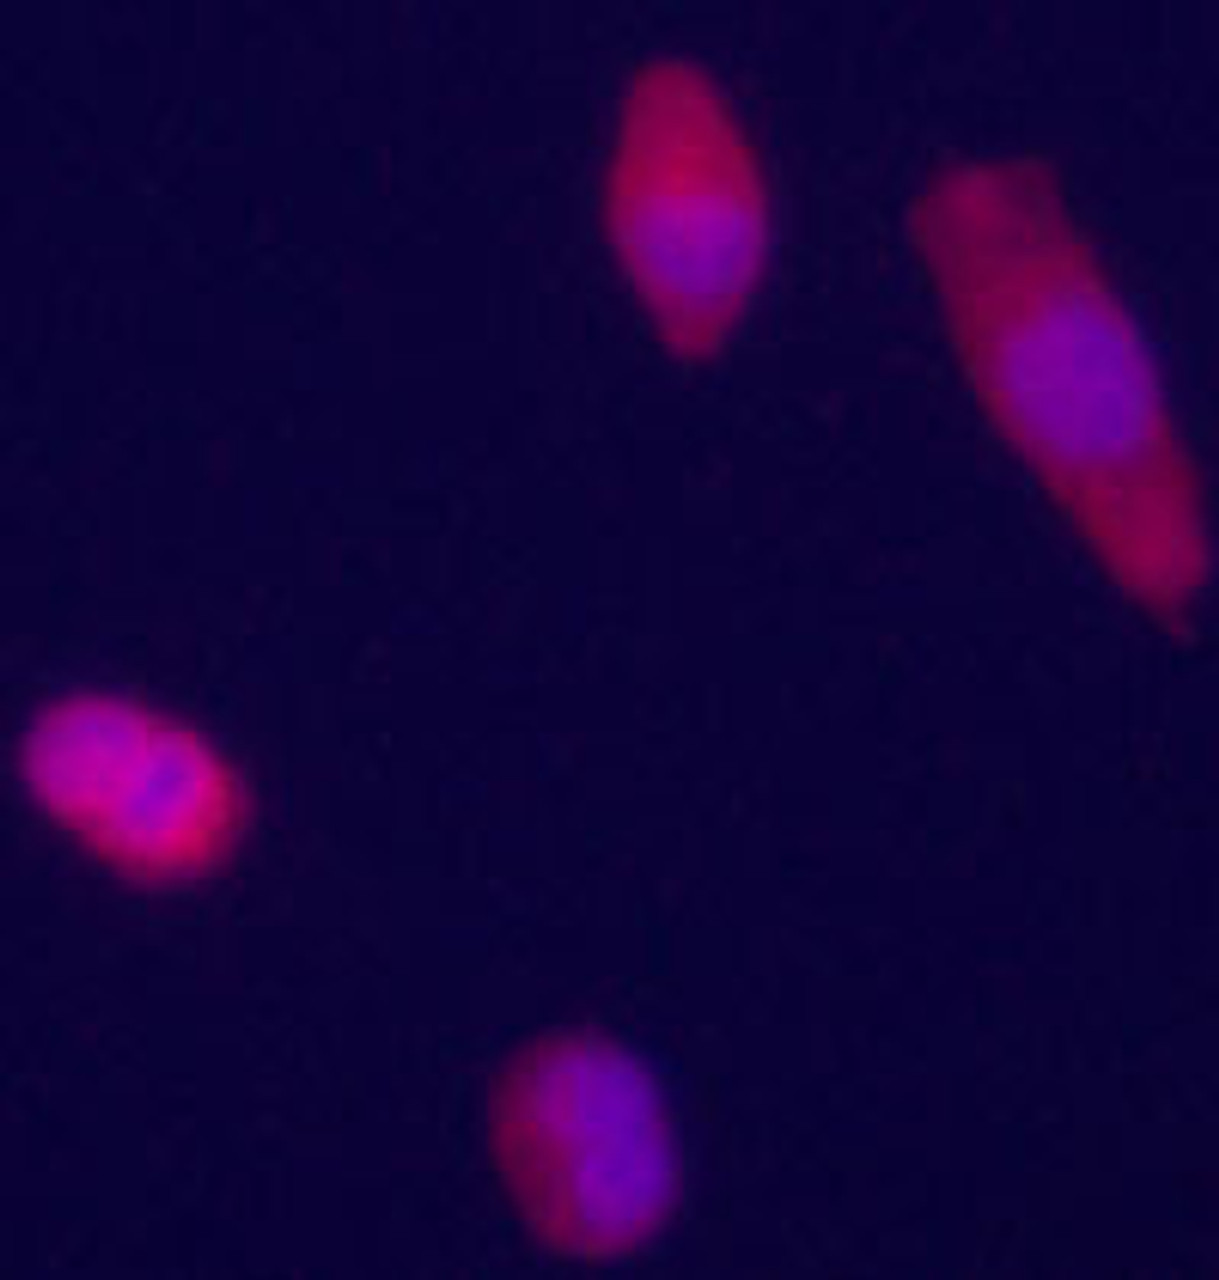 Immunofluorecence staining of anti-GPC3 Pab on HepG2 cells. The cells were acetone fixated. Antibody dilution of 1:50. Original magnification 1:400. Data and protocol courtesy of Dr. Mariana Dabeva, Department of Medicine at Albert Einstein College of Medicine.